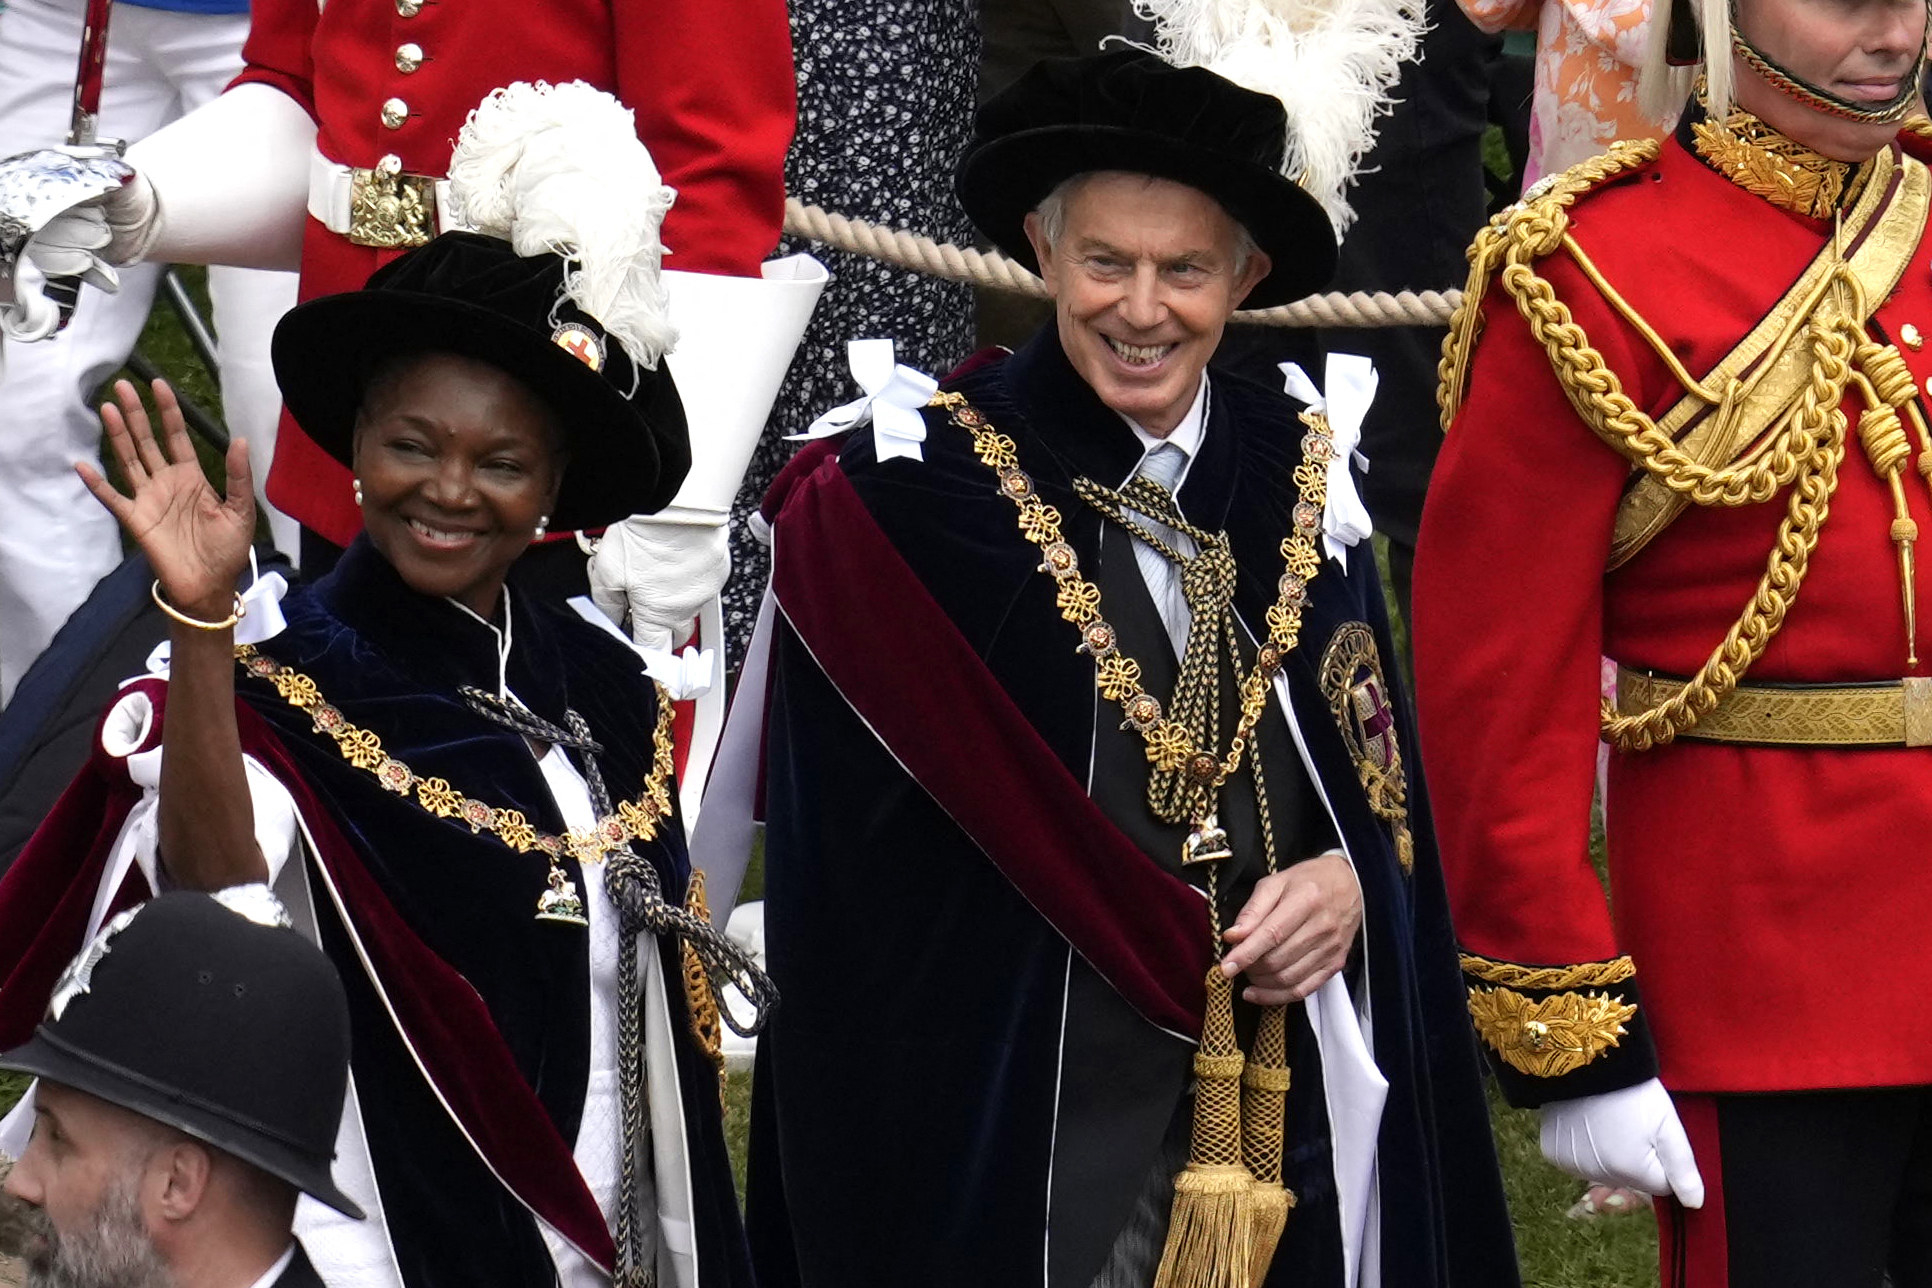 Prince Andrew Barred From Public-Facing Elements Of Garter Day Event